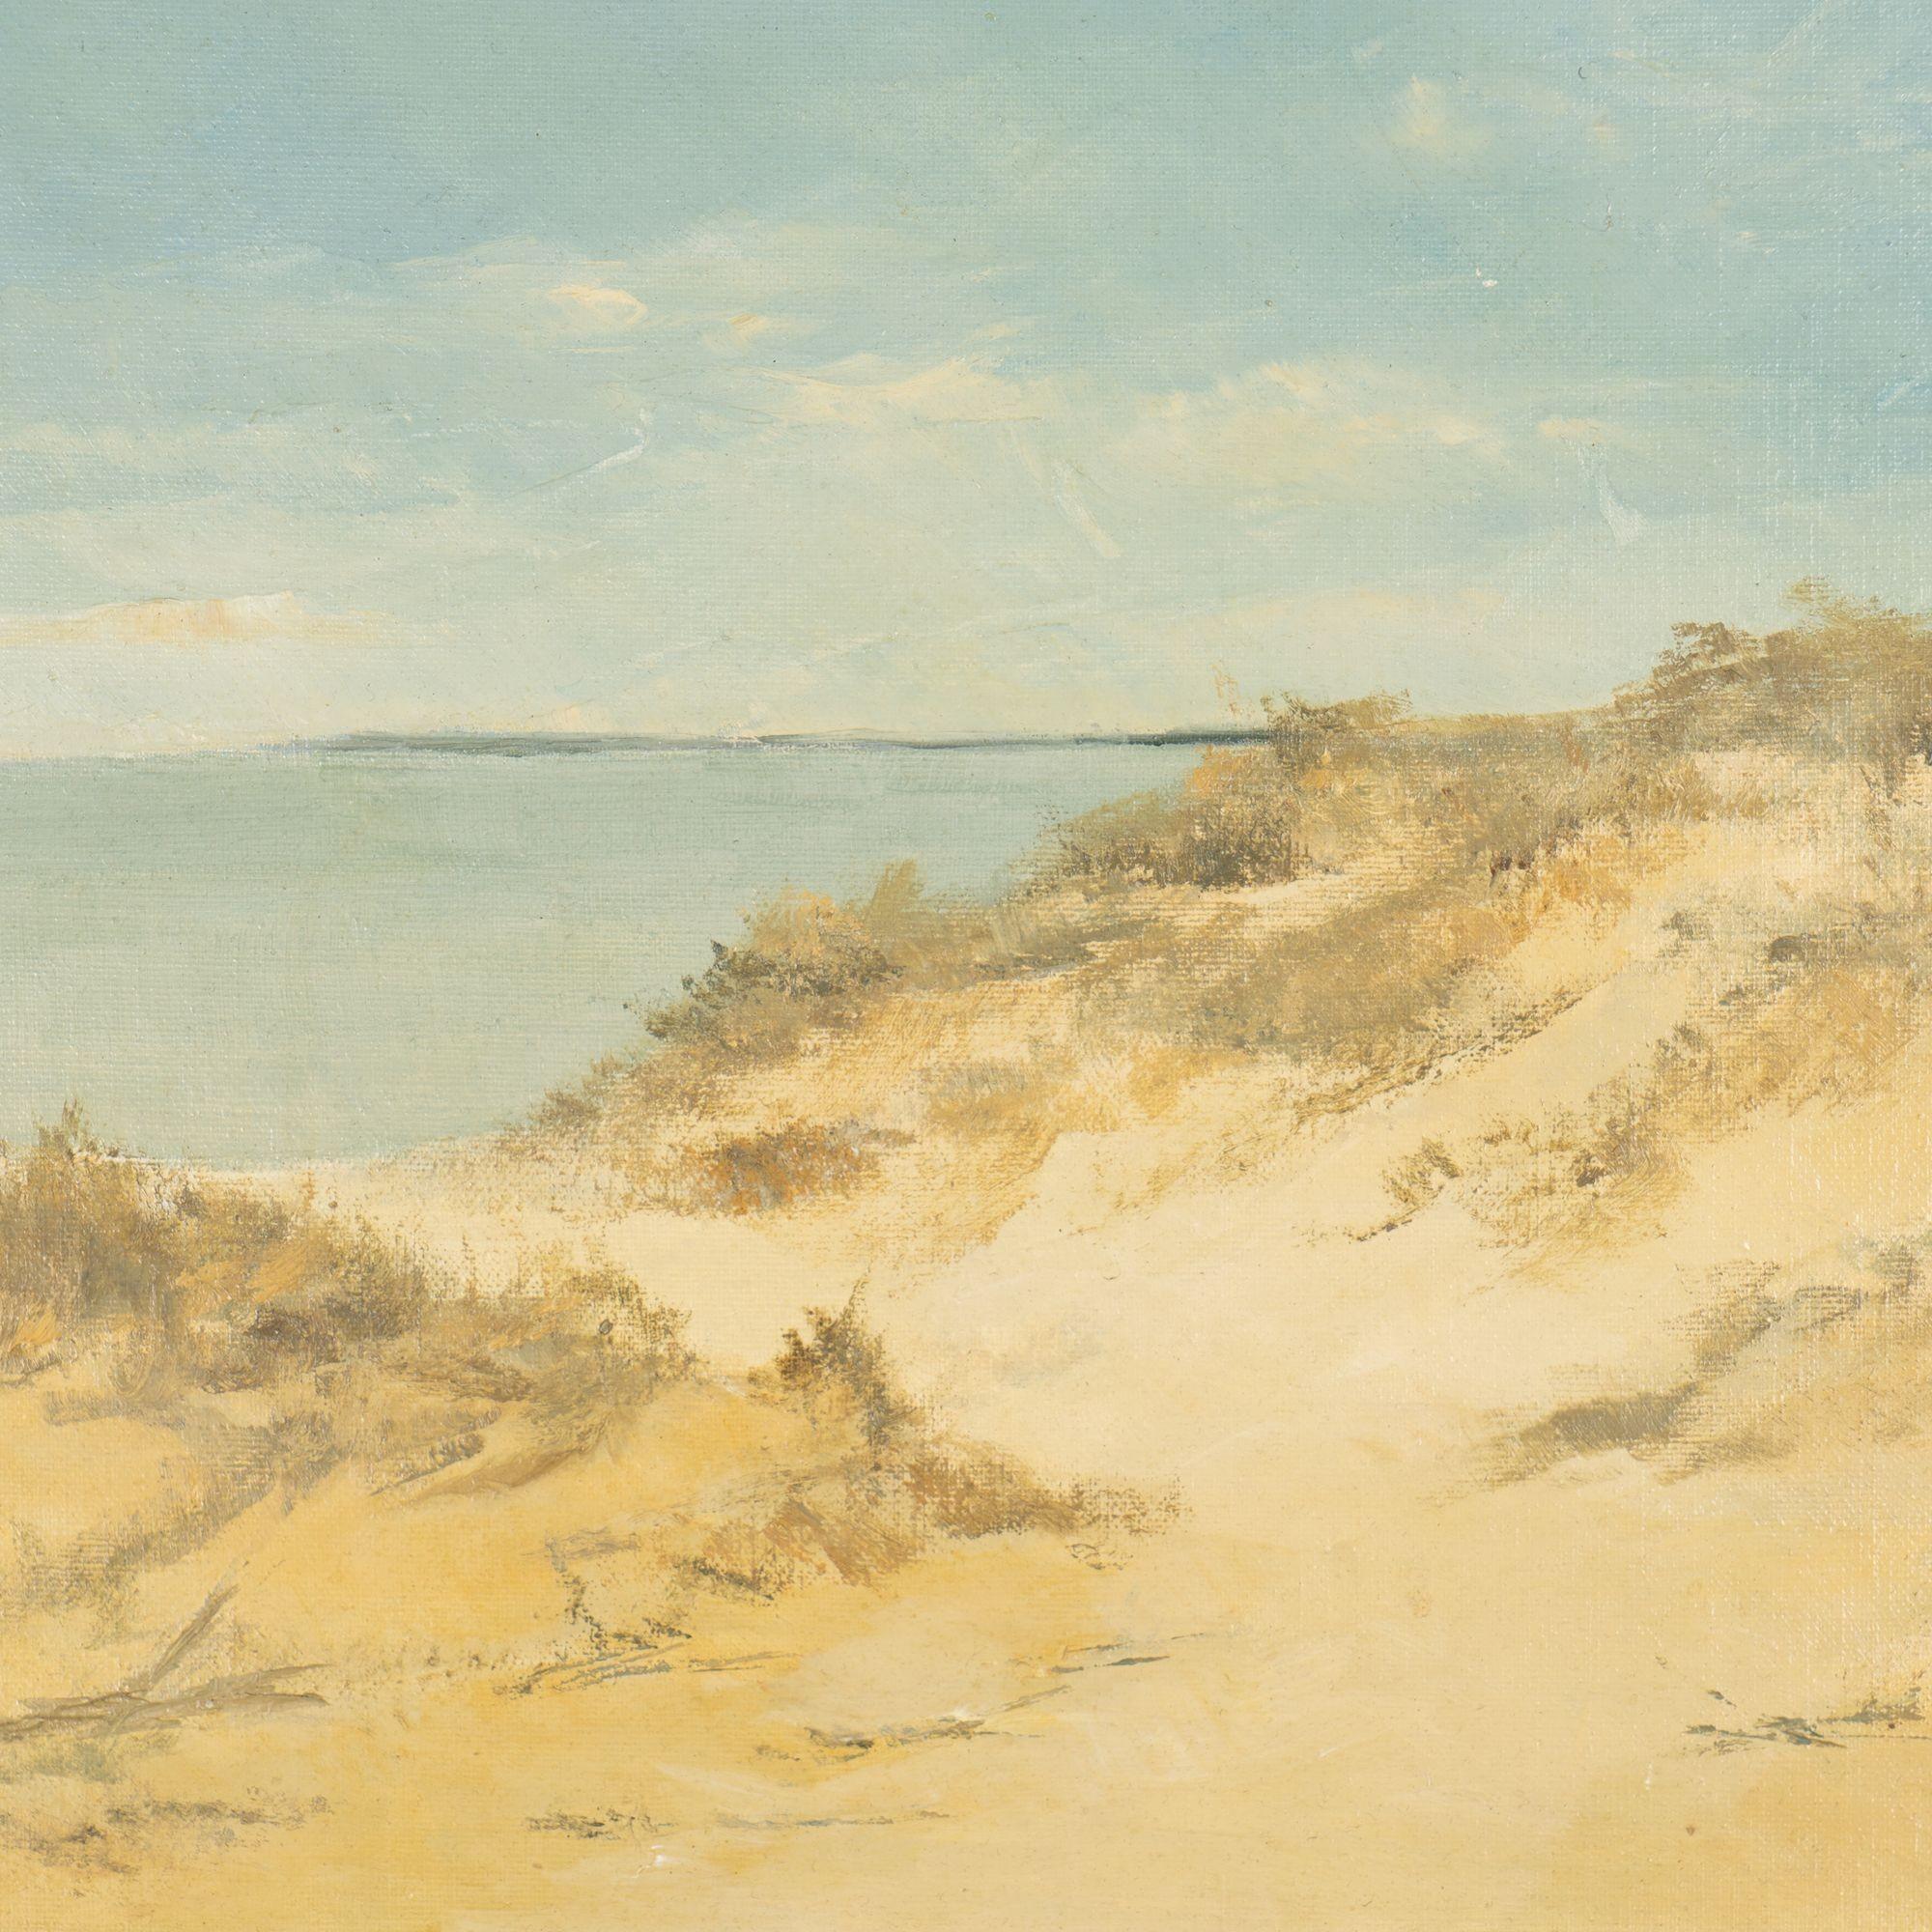 Oil on academy board view of Scottish seaside dunes and the water beyond.
Born in Scotland in 1949, John Bathgate grew up in the rolling Scottish Border country. His art education followed an apprenticeship style training with the artist and teacher